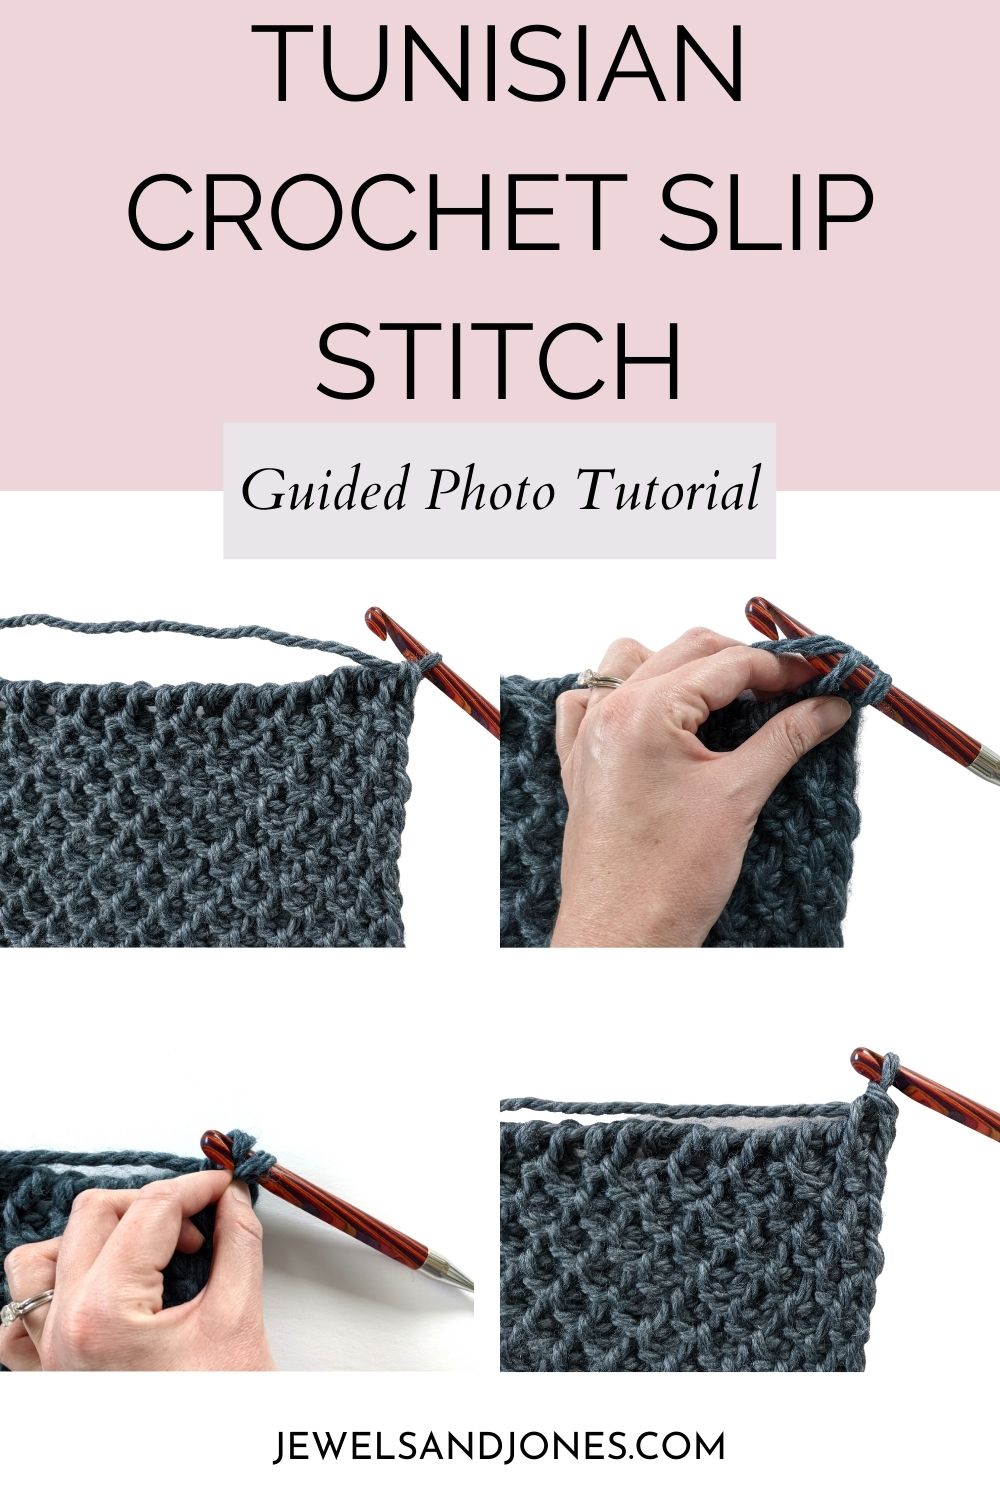 Image has 4 pictures that show the steps to make a slip stitch.